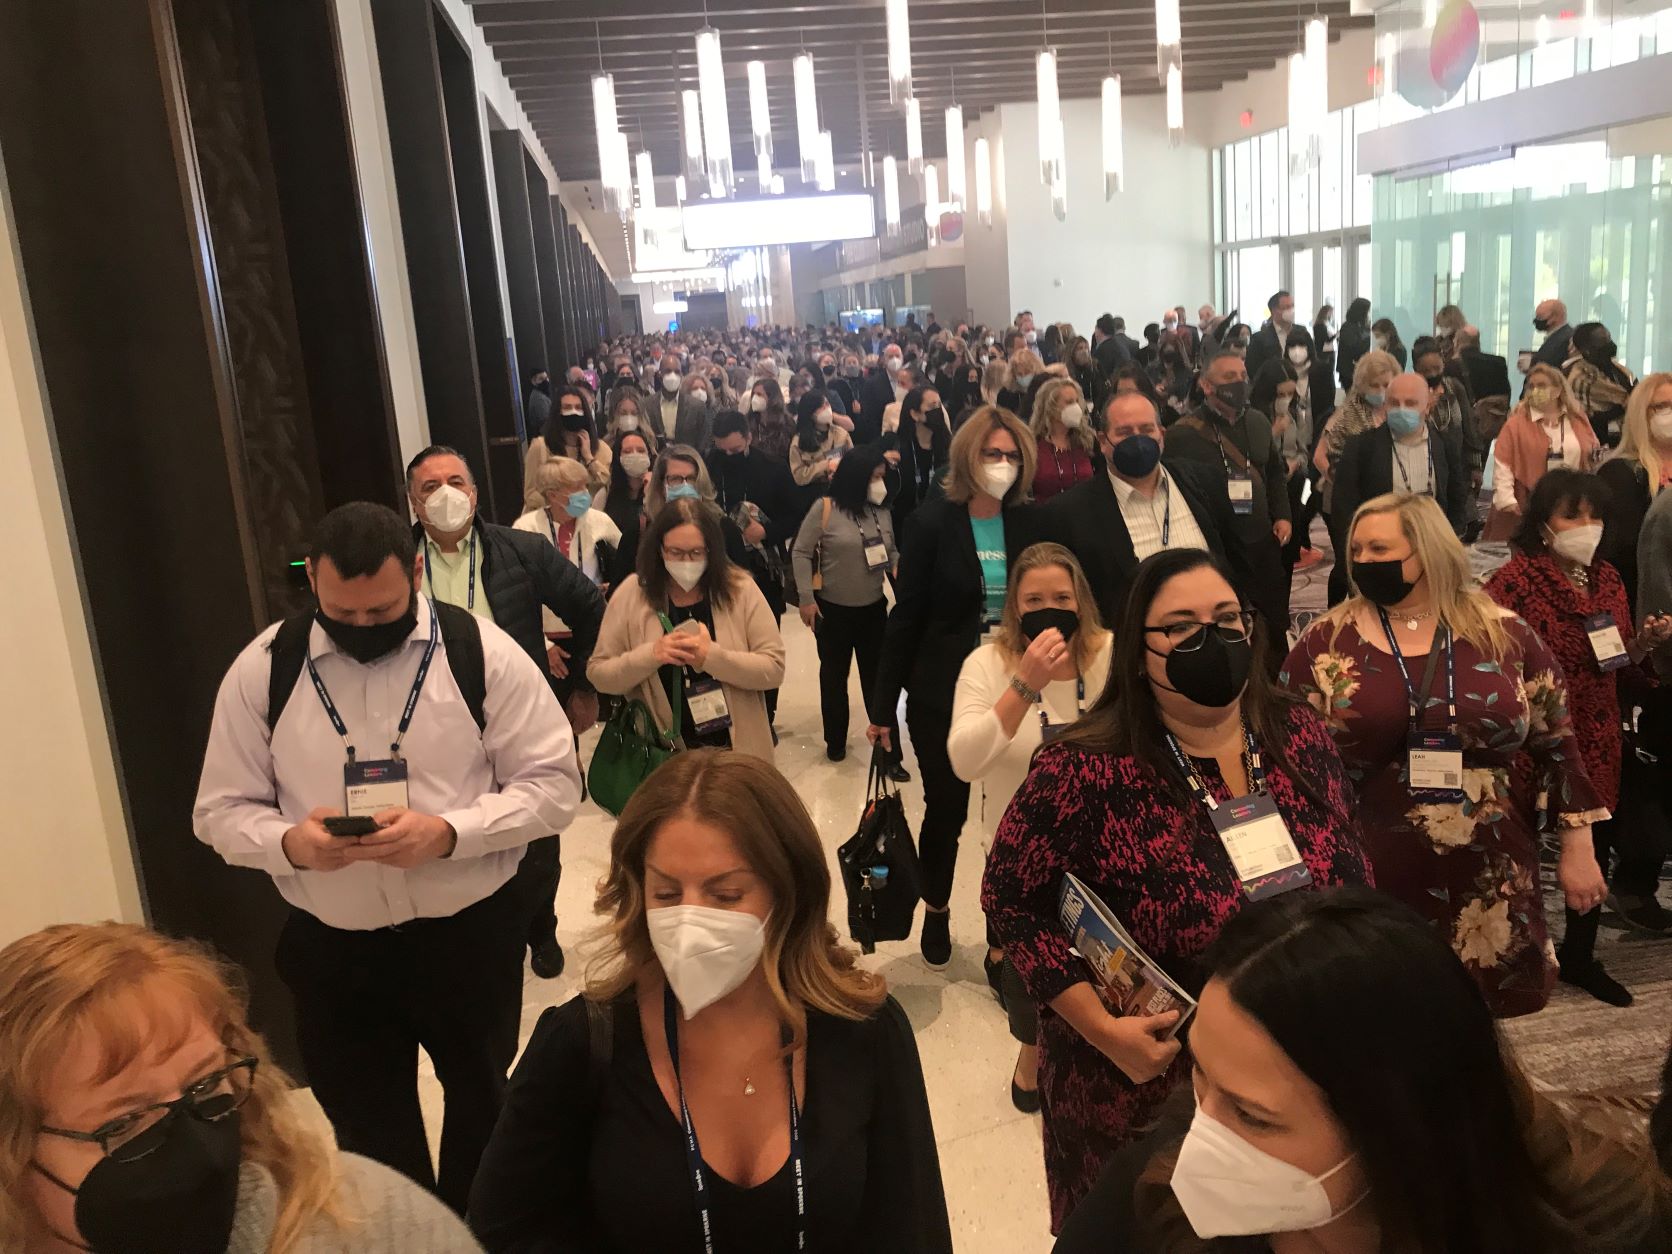 PCMA Convening Leaders Draws a Respectable, and Masked, Crowd to Las